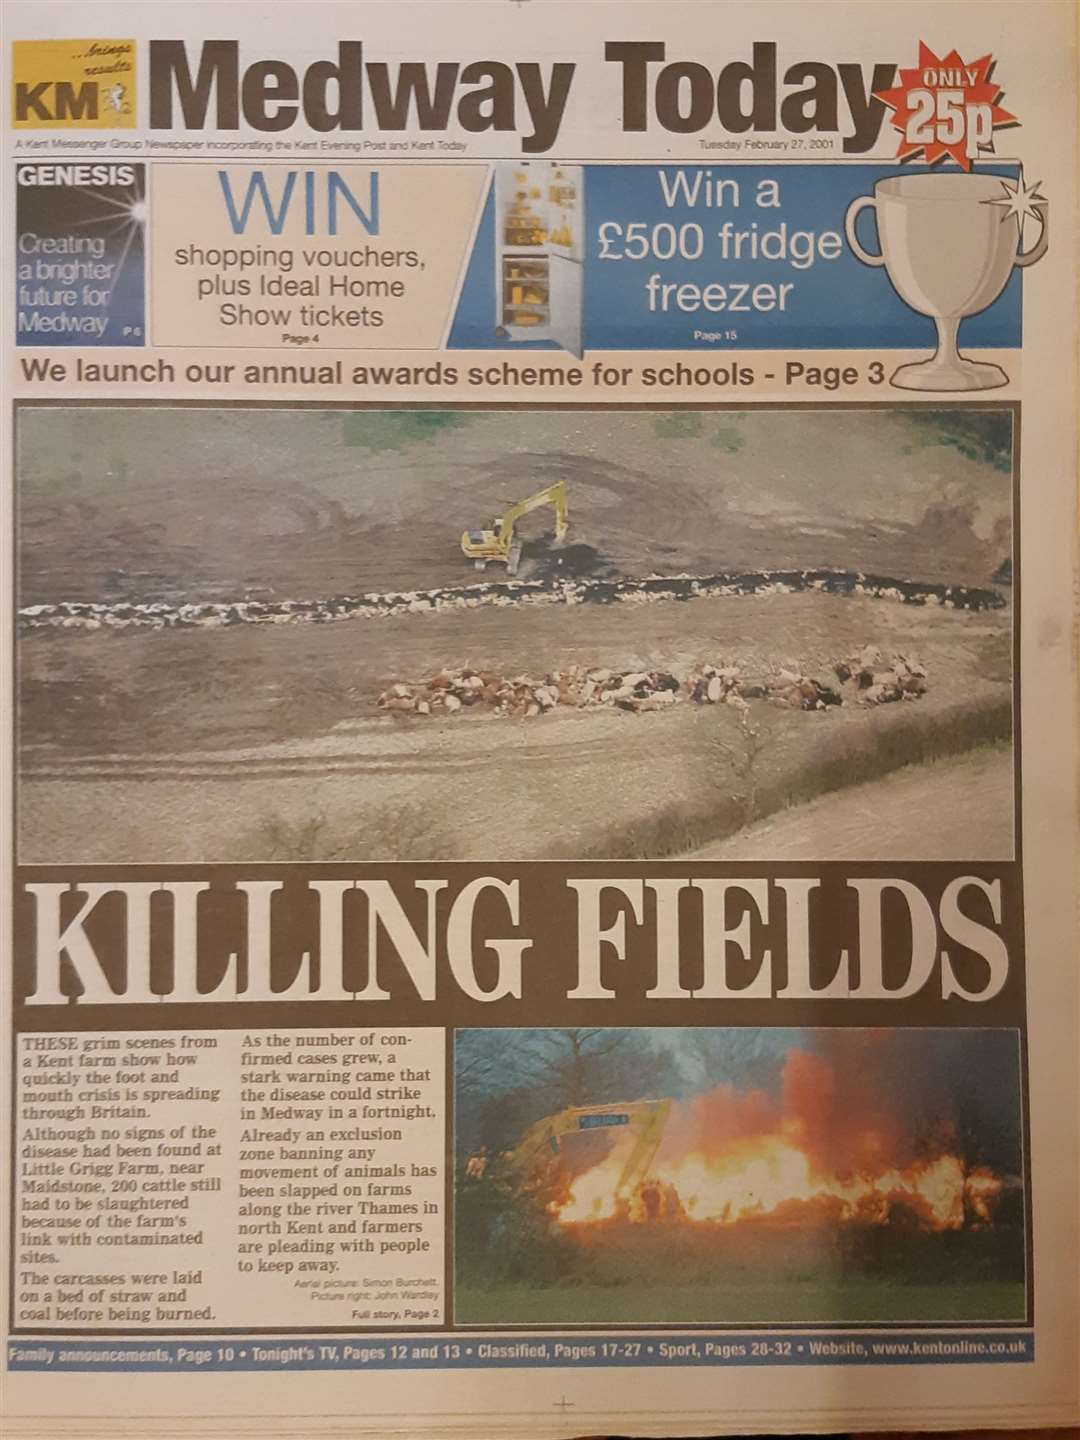 The KM Group's evening paper, February 27, 2001